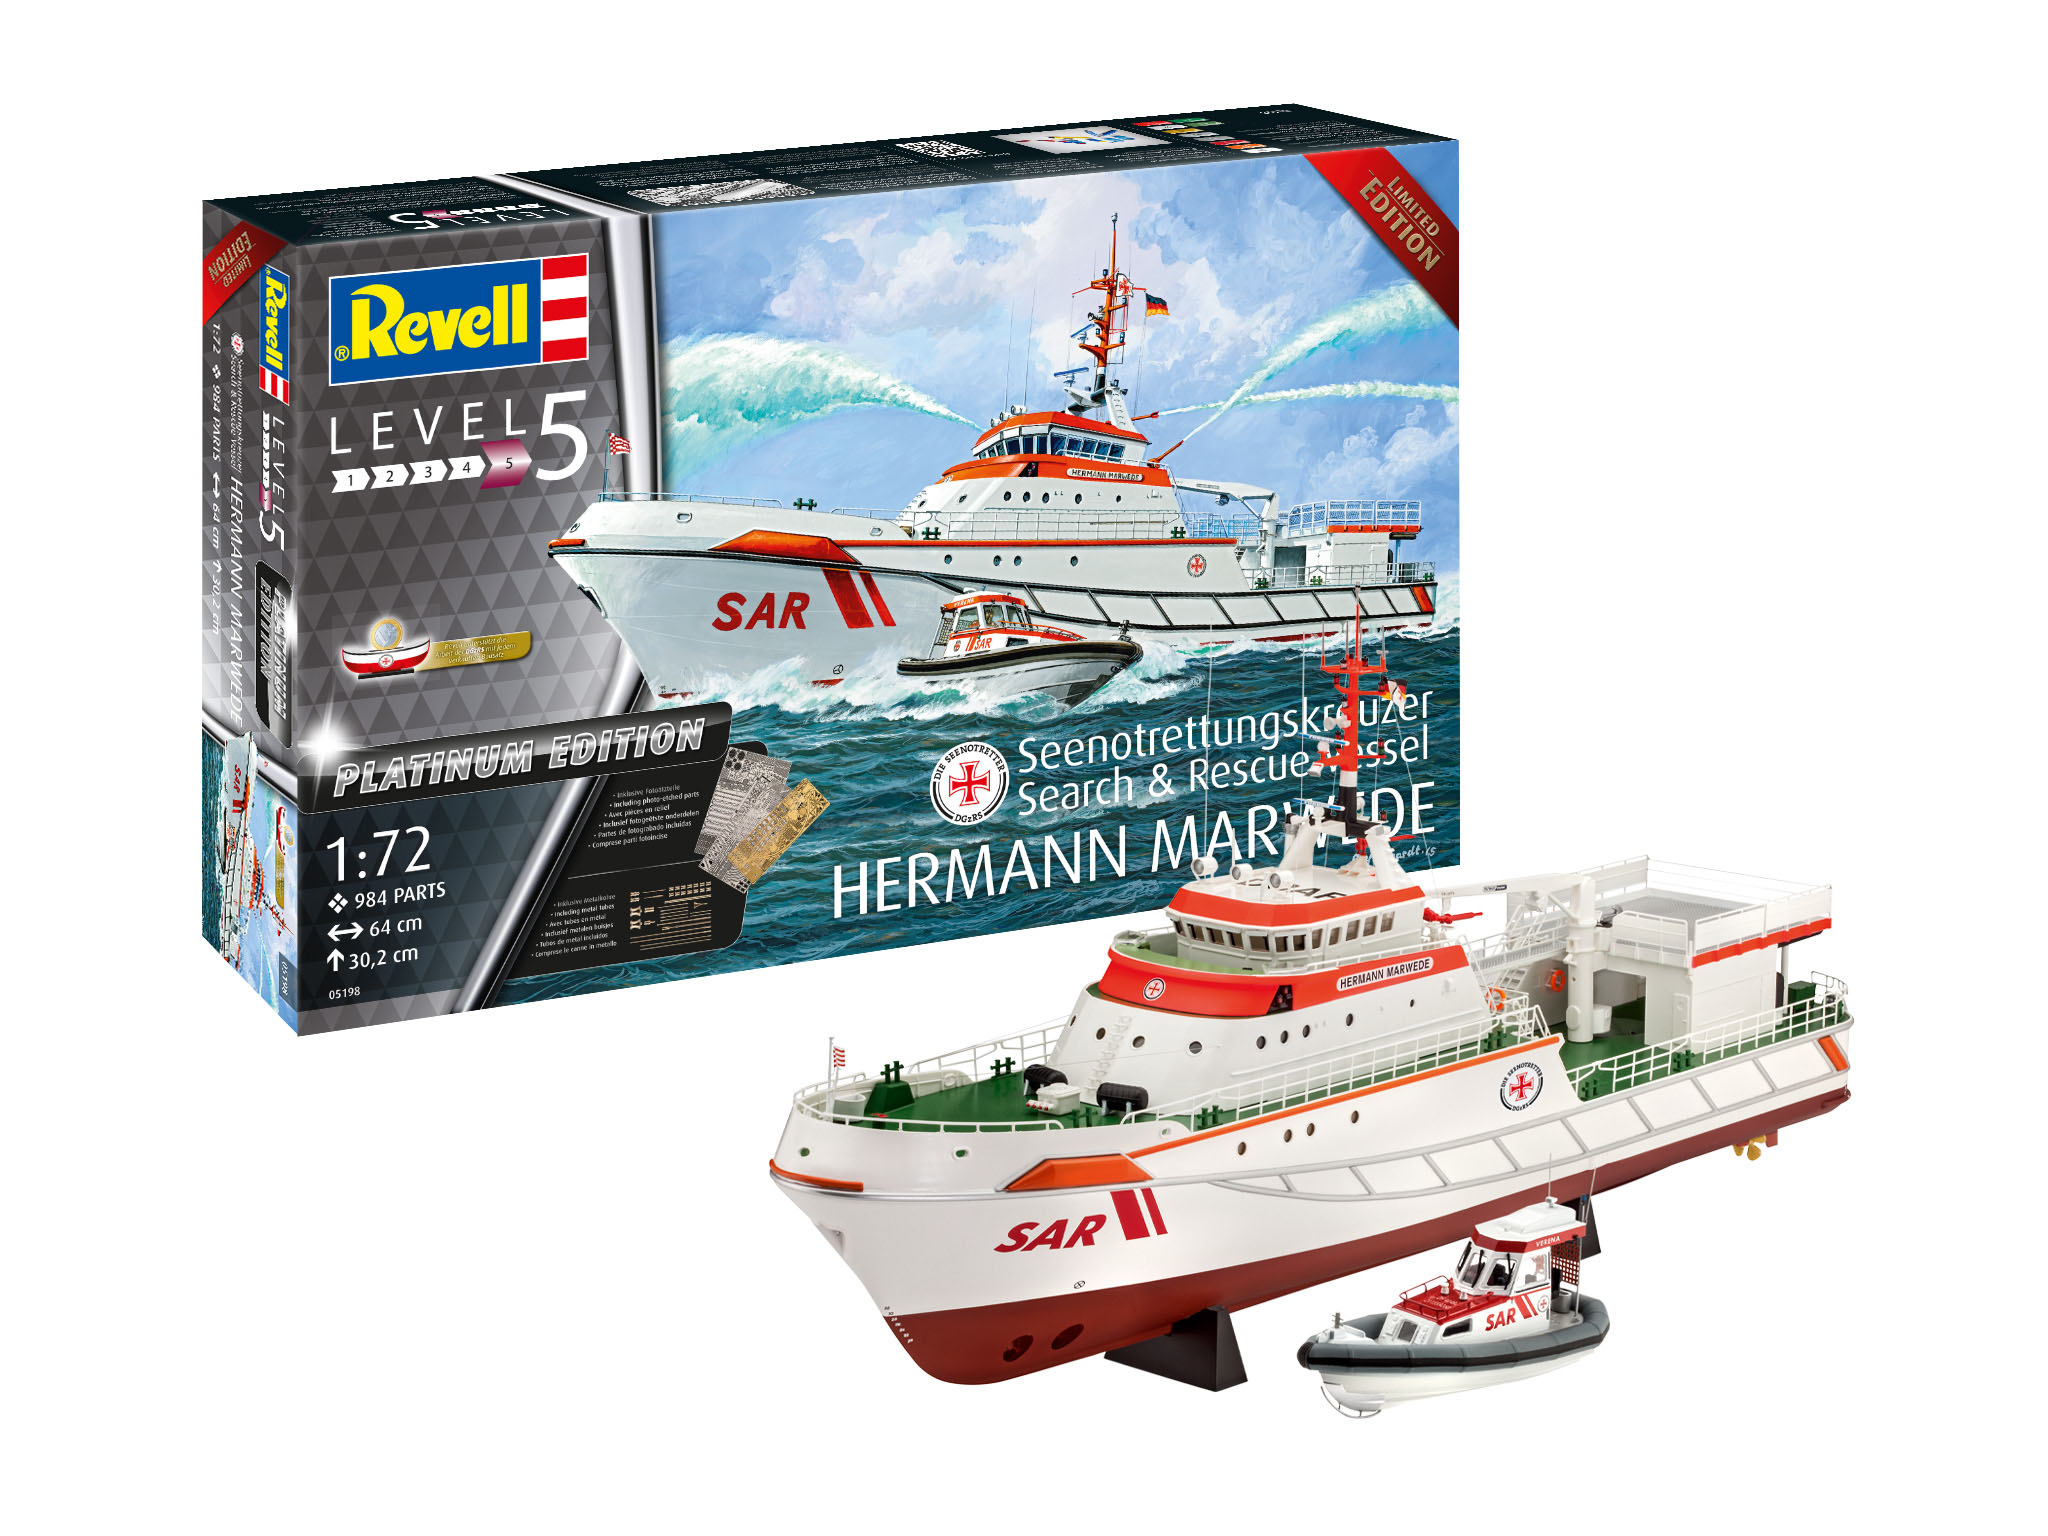 Revell Platinum Edition Search & Rescue Vessel HERMANN MARWEDE in 1:72 bouwpakket